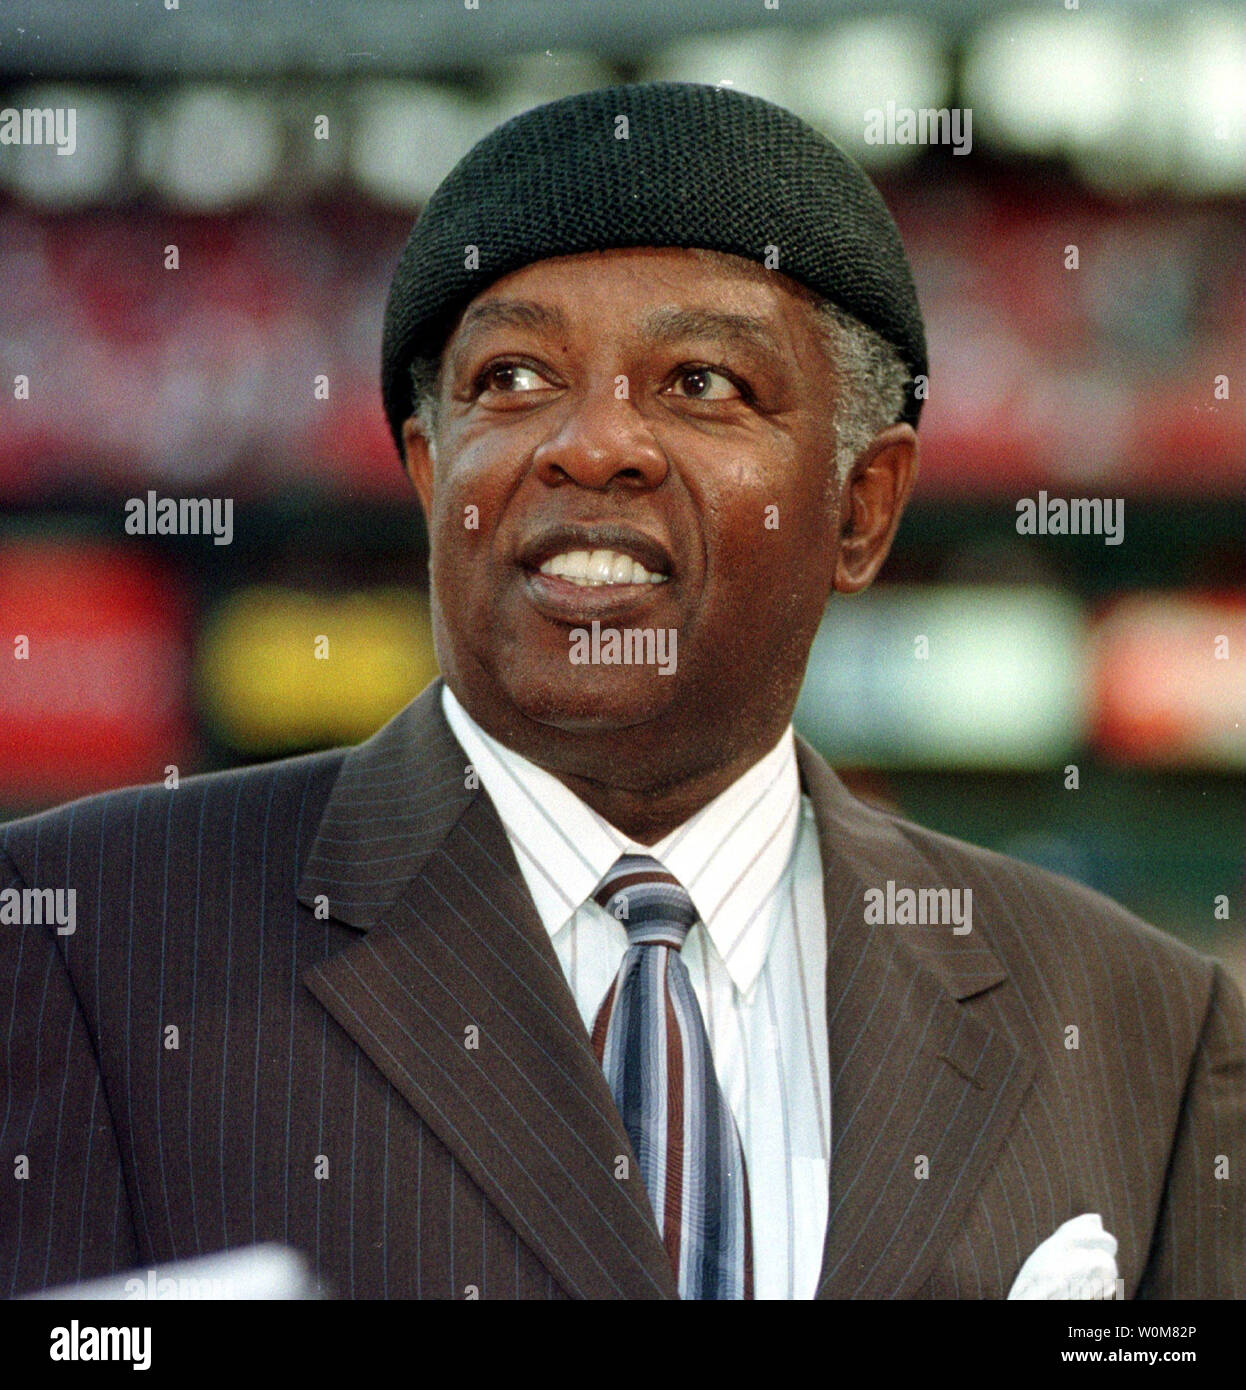 ST. LOUIS  MISSOURI, USA: Grammy Award winner Lou Rawls died of cancer at the age of 72 on January 6, 2006.  He is shown smiling to the crowd after being introduced prior to a St. Louis Cardinals-Milwaukee Brewers baseball game at Busch Stadium on September 15, 1999.  (UPI Photo/Bill Greenblatt/FILES) Stock Photo